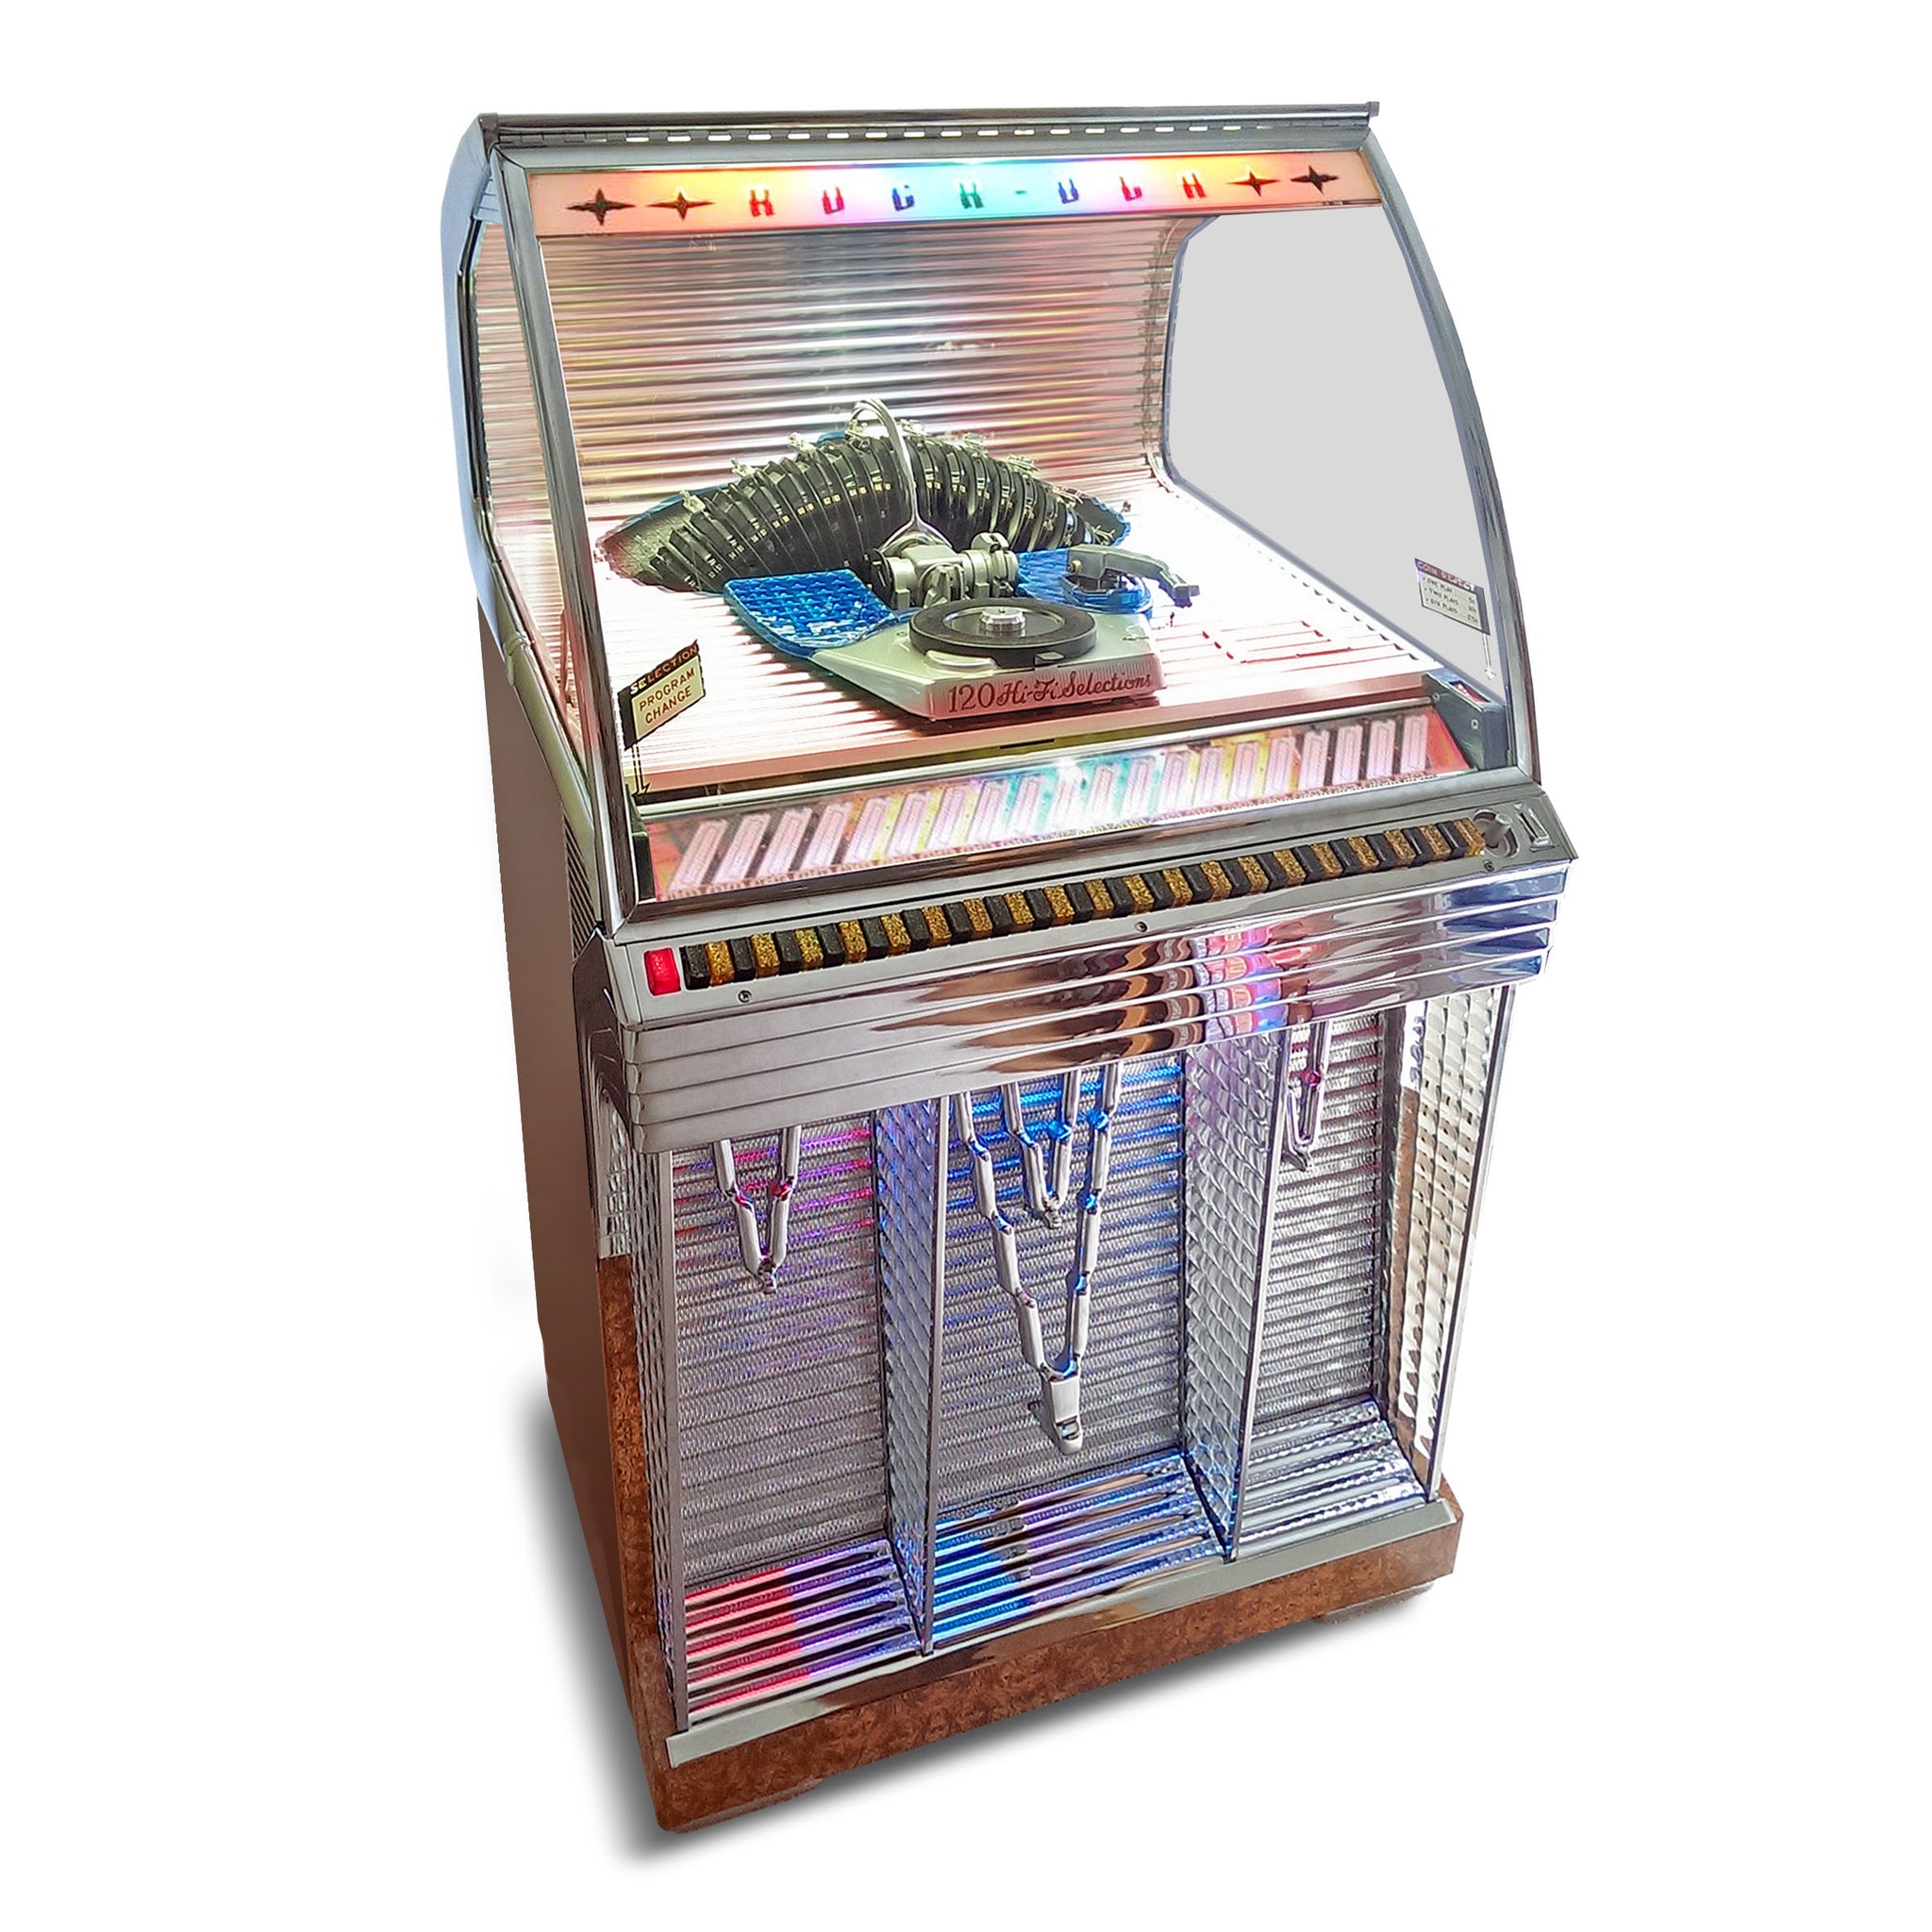 The 1955 Rock Ola 1448 120 selection Jukebox - Coming soon